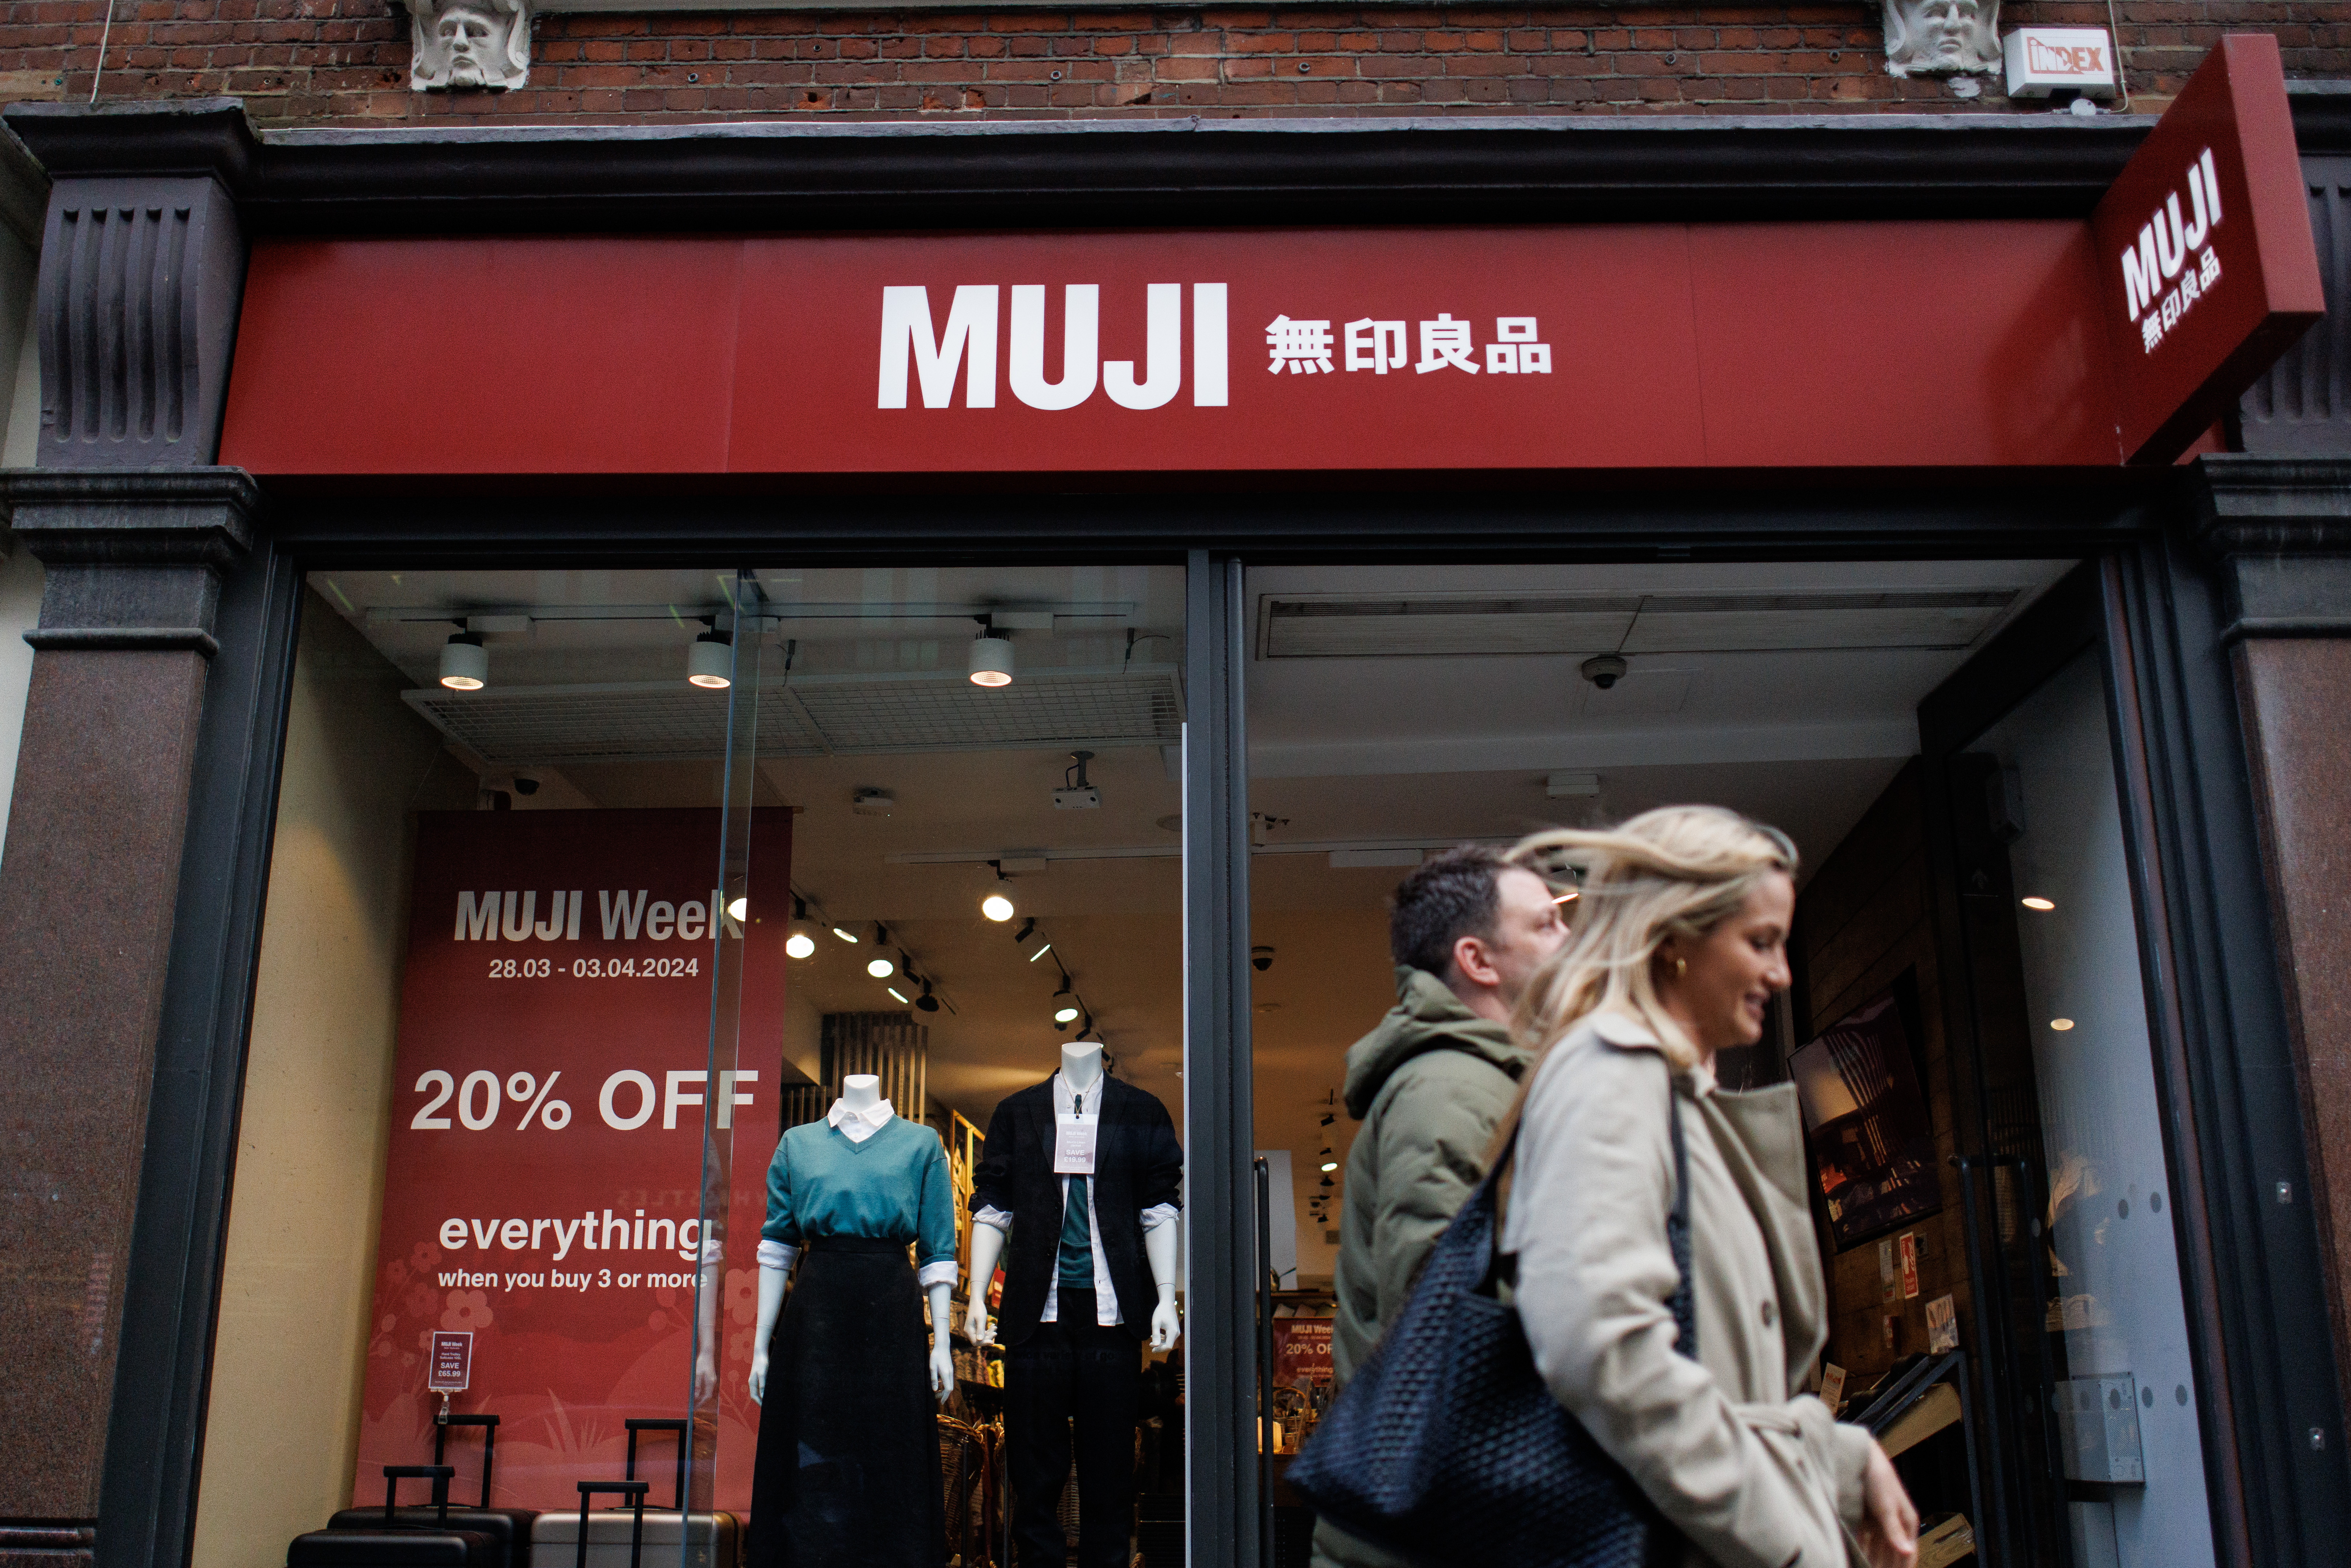 Muji is famous for its wide range of Japanese clothing and homeware